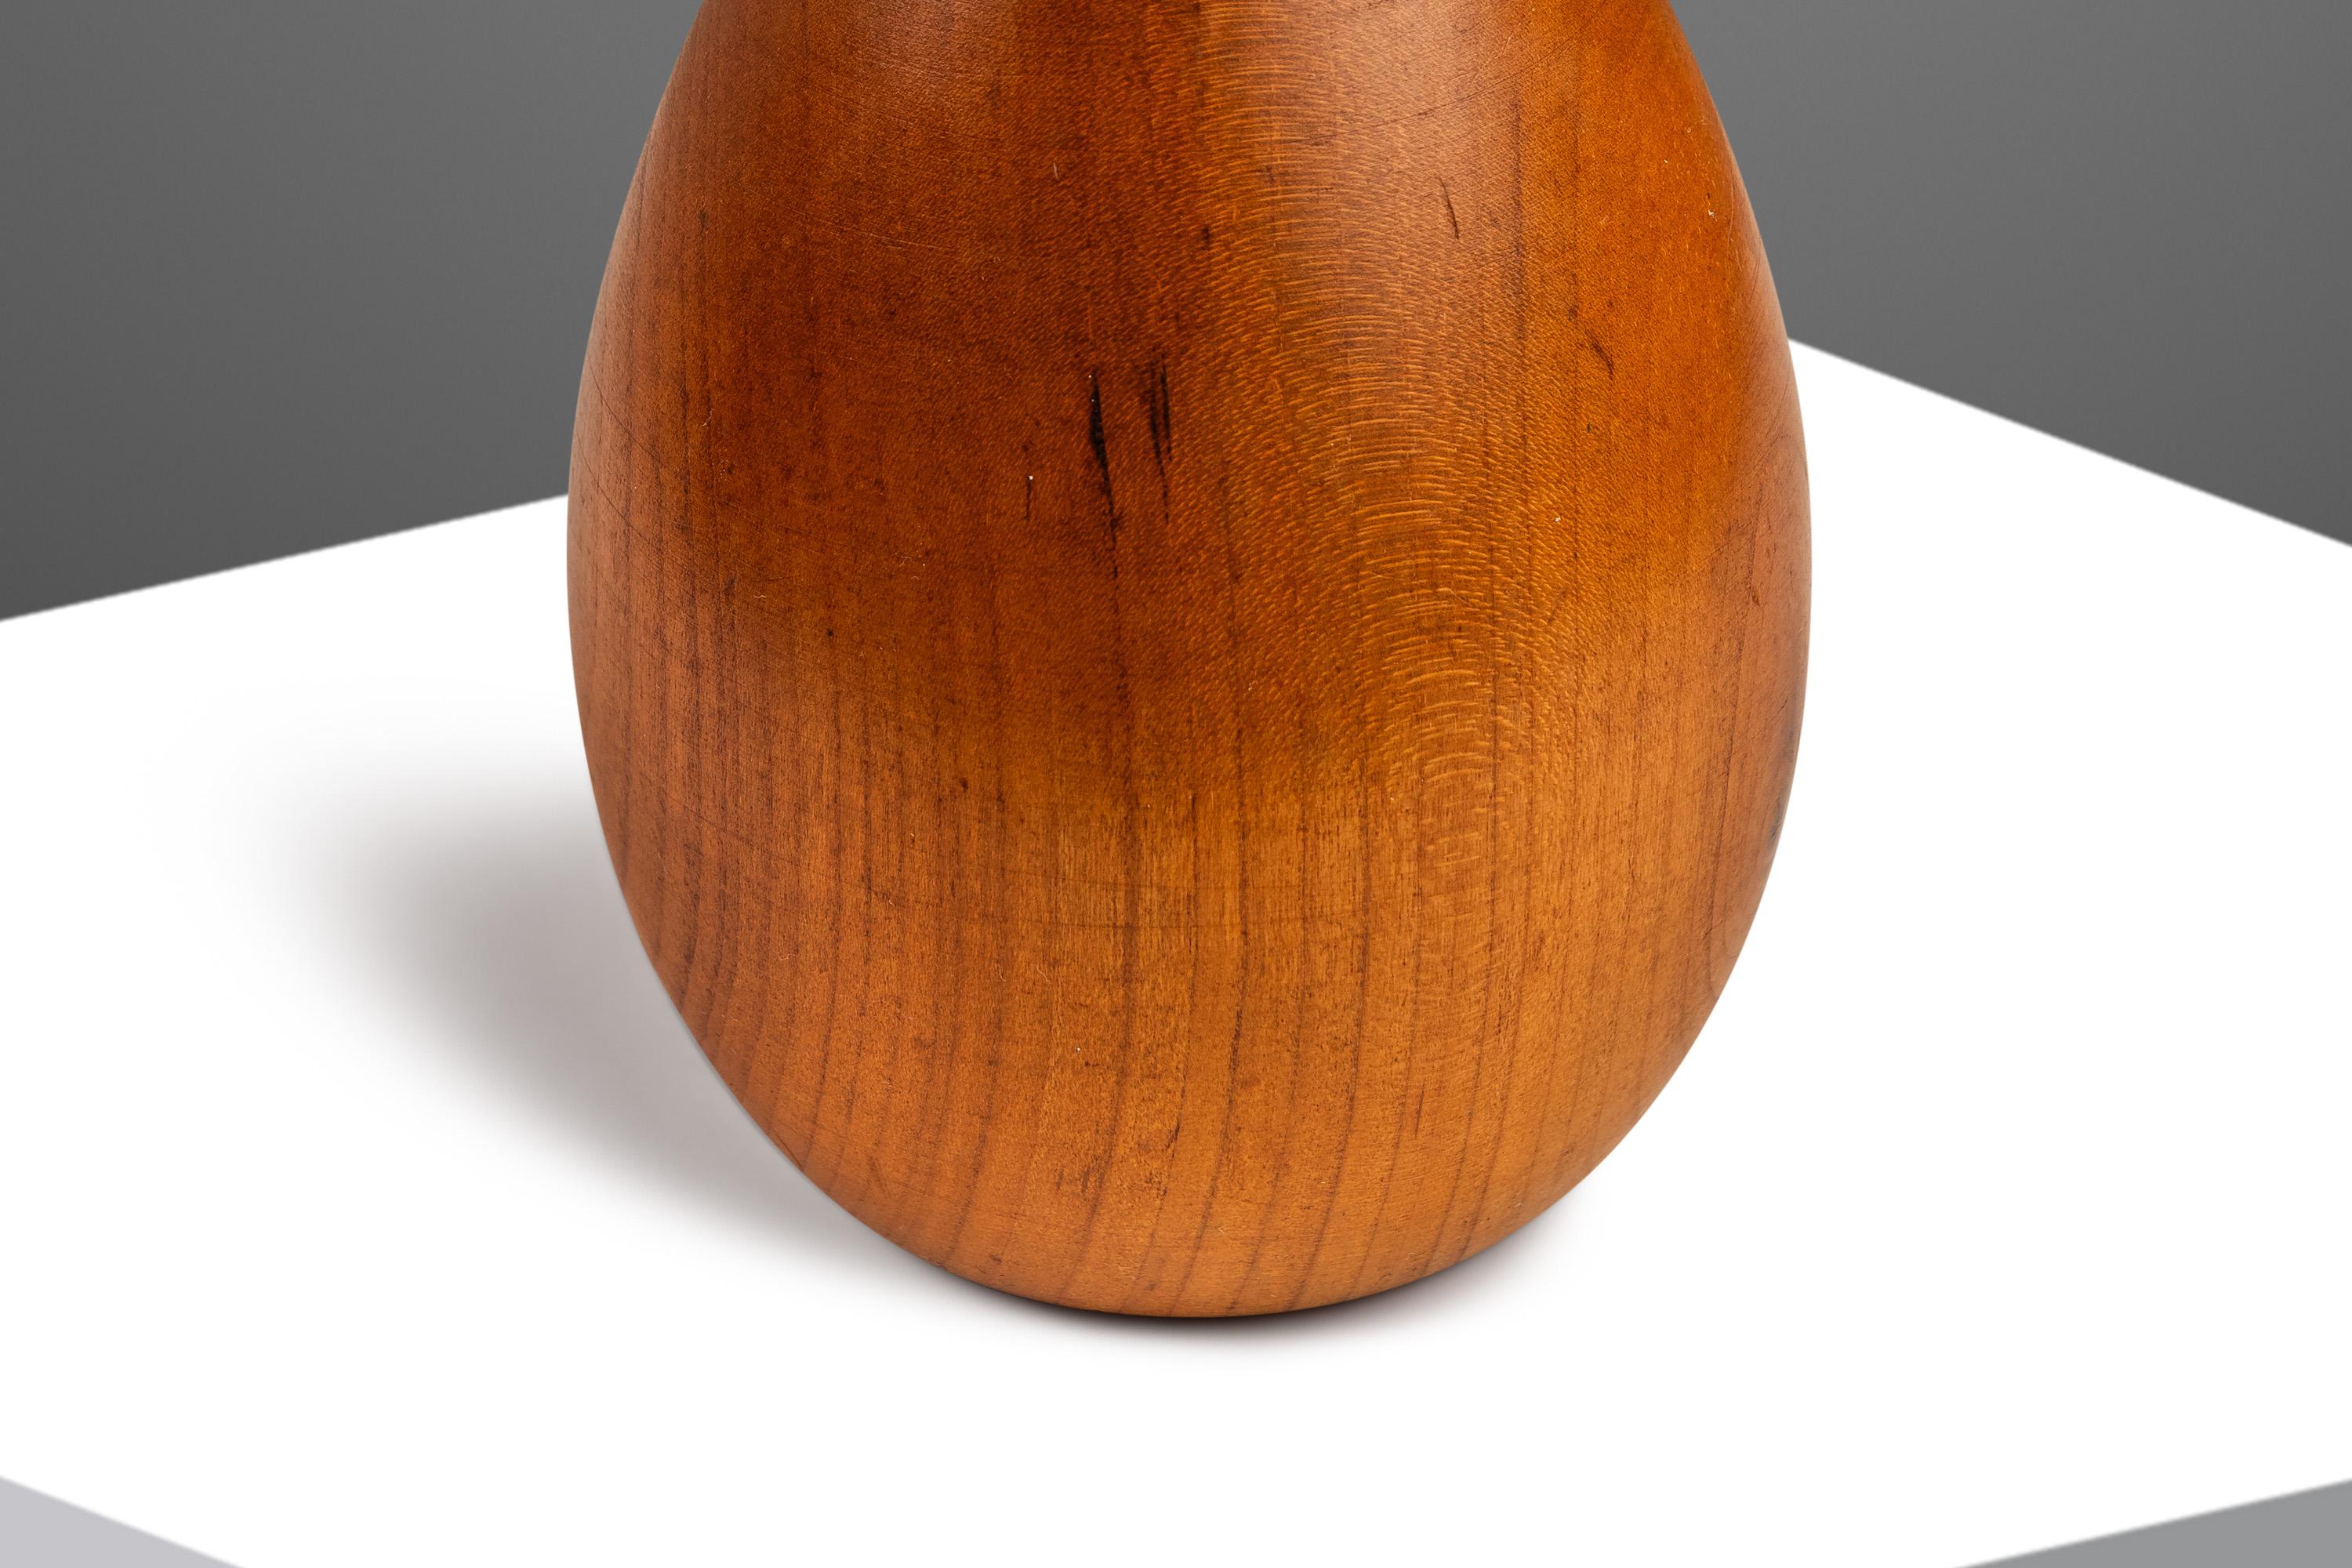 Signed Petite Wood-Turned Vase in solid Walnut by George Biersdorf, USA, c. 1979 For Sale 6